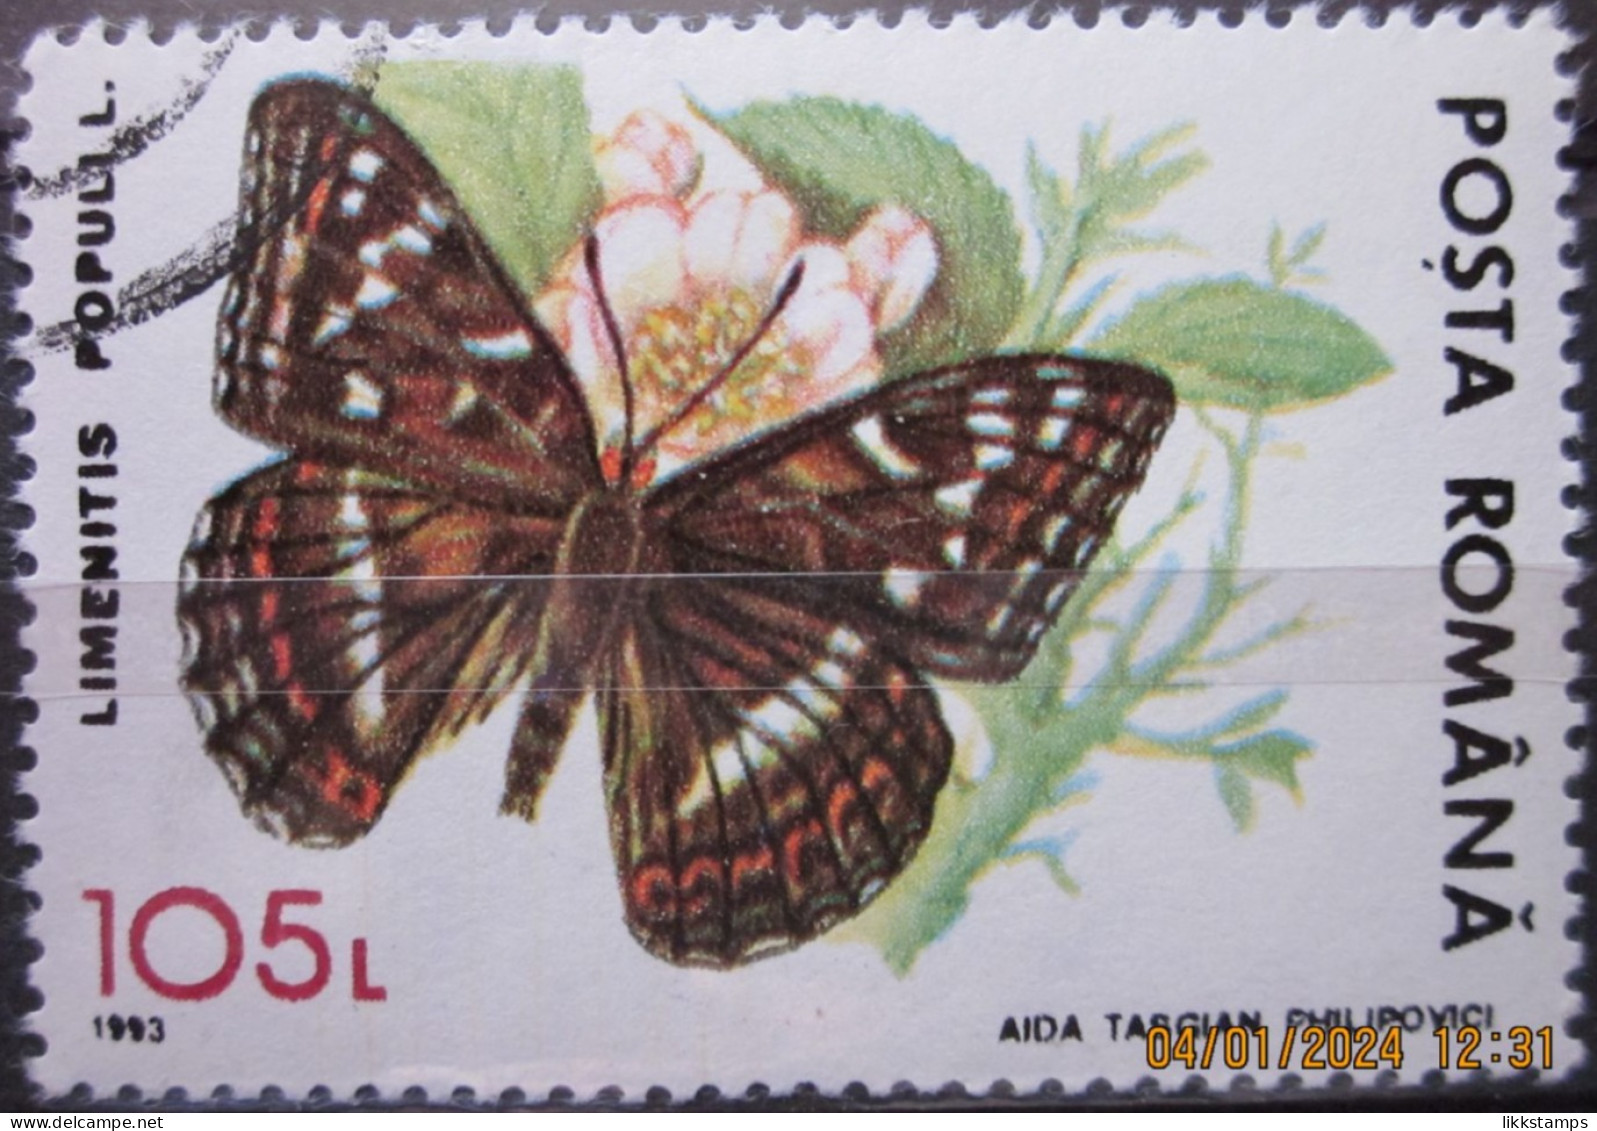 ROMANIA ~ 1993 ~ S.G. NUMBERS 5531. ~ BUTTERFLIES ~ VFU #03568 - Used Stamps